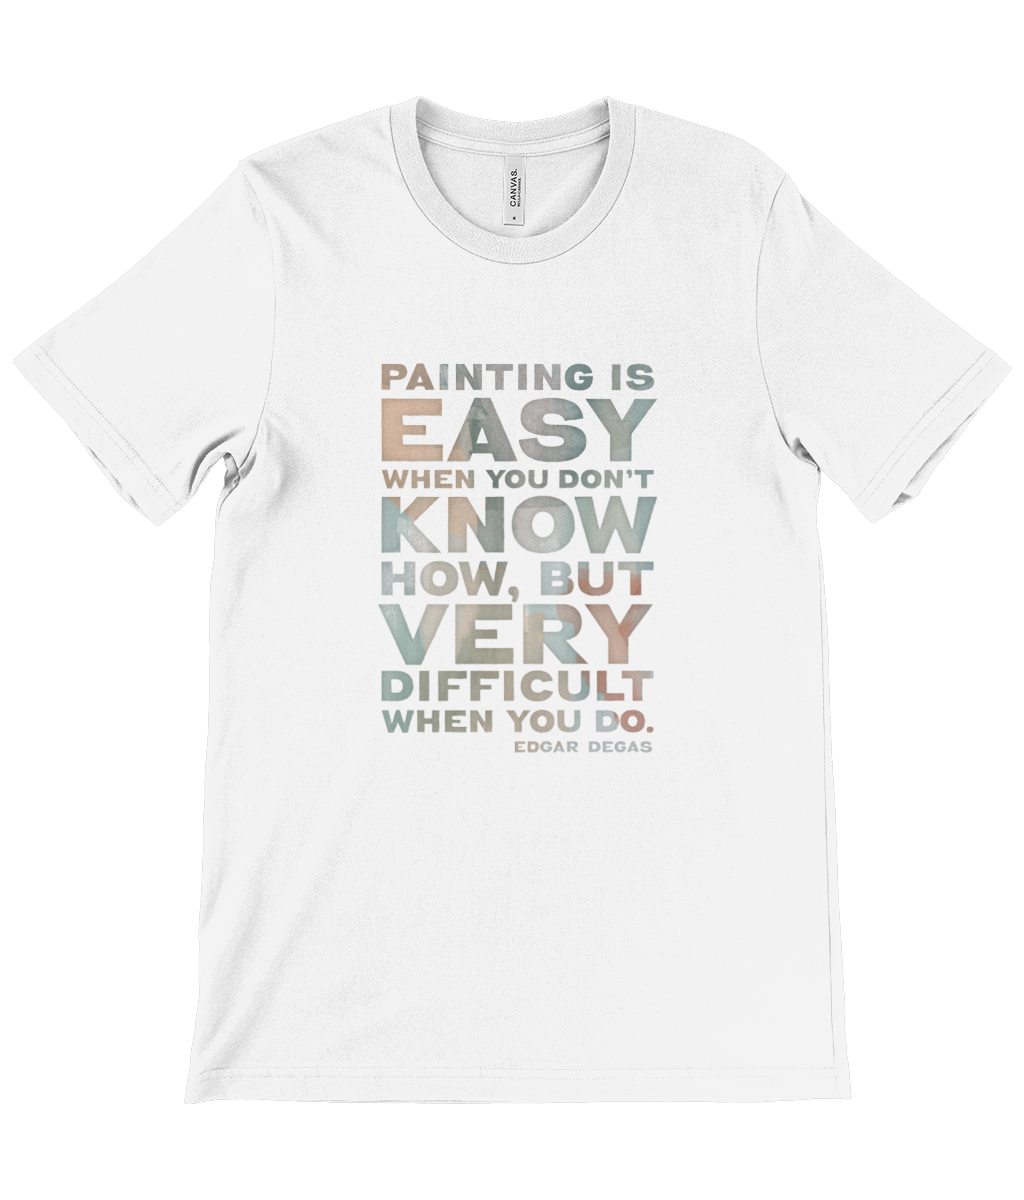 Canvas Unisex Crew Neck T-Shirt - Painting is easy when you don't know how, but very difficult when you do. Edgar Degas